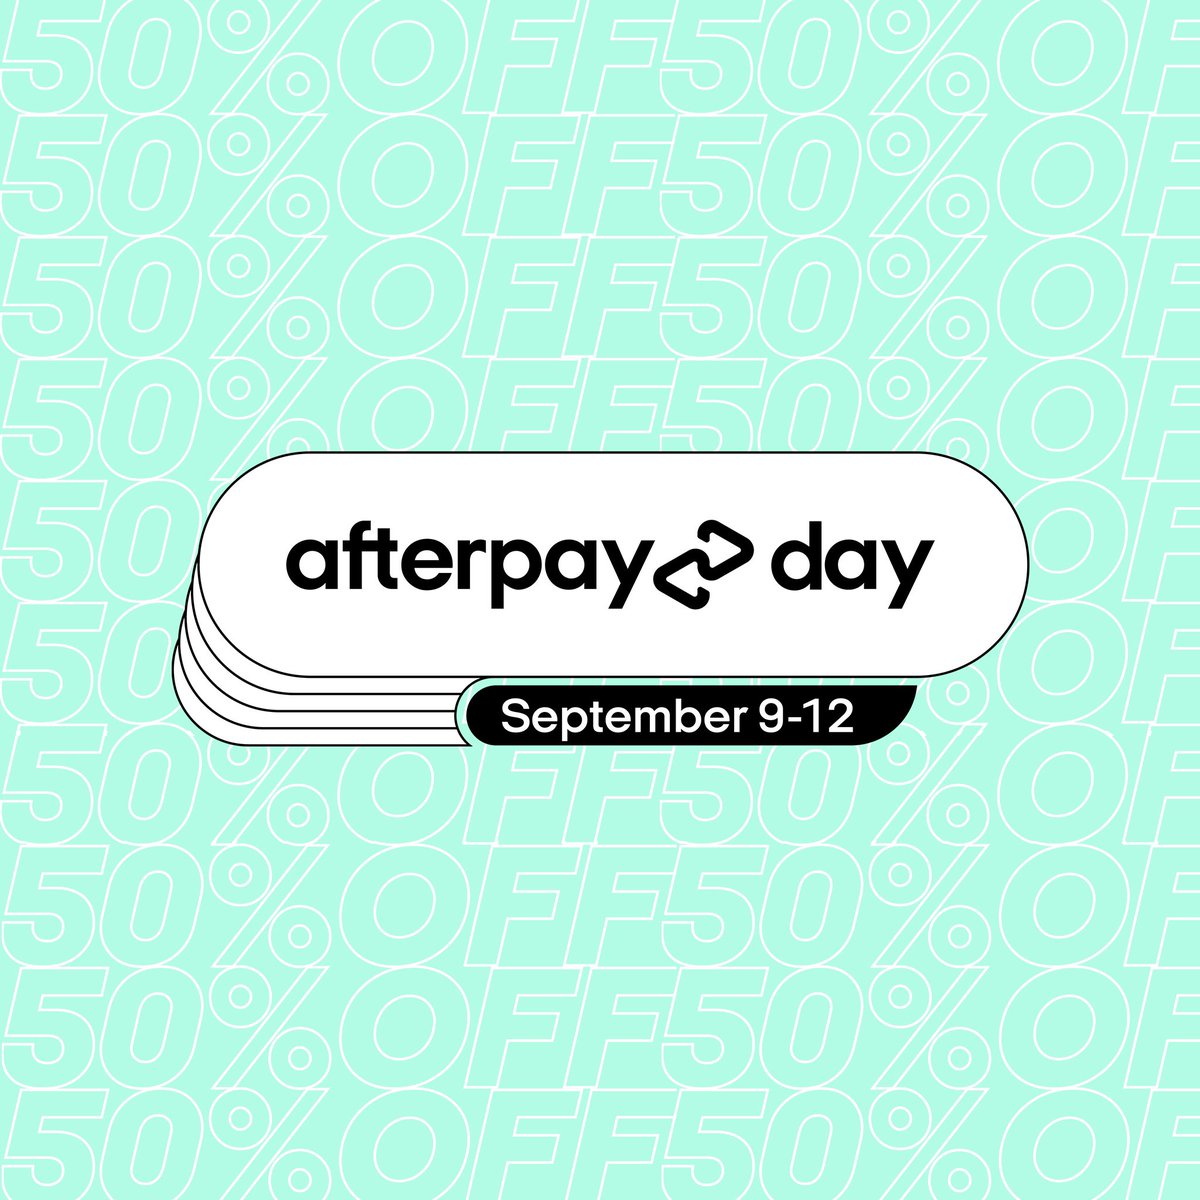 #Afterpayday is HERE! From September 9th-12th Enjoy 50% off when you check out with Afterpay and use promo code AFTERPAYDAY. 🌐nrvs.shop